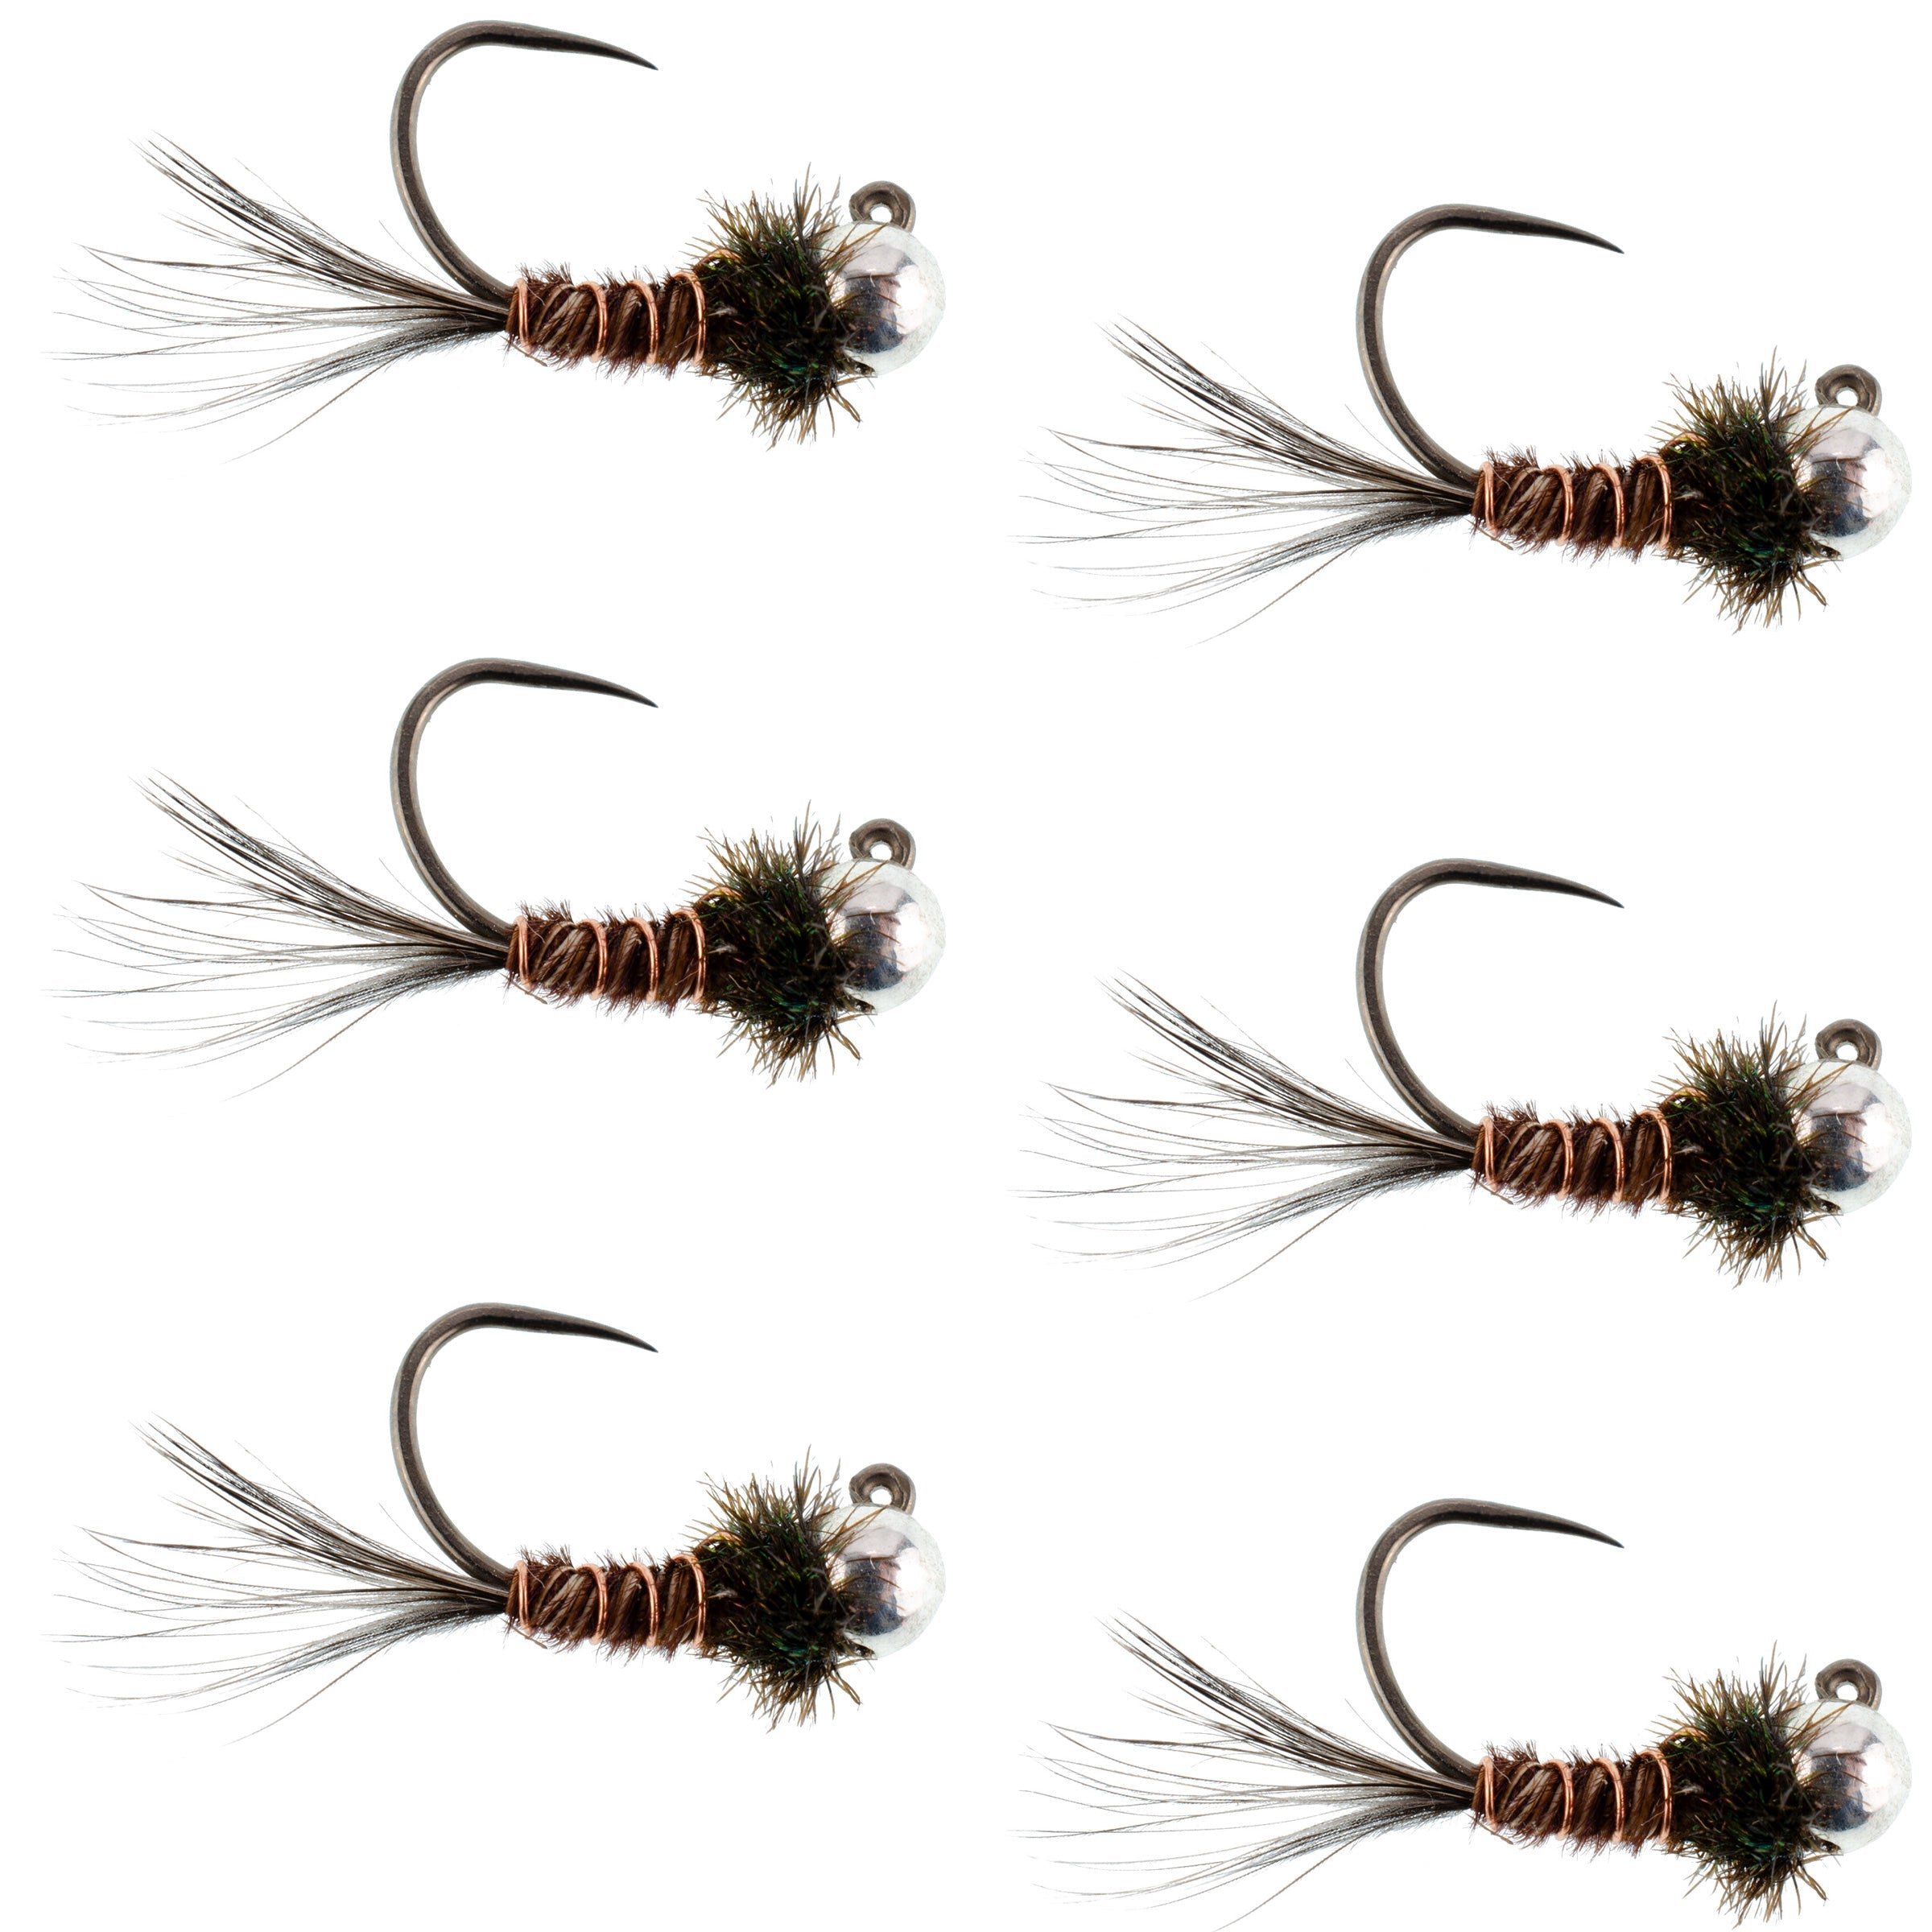 Tungsten Bead Pheasant Tail Tactical Jig Czech Nymph Euro Nymphing Fly - 6 Flies Size 14